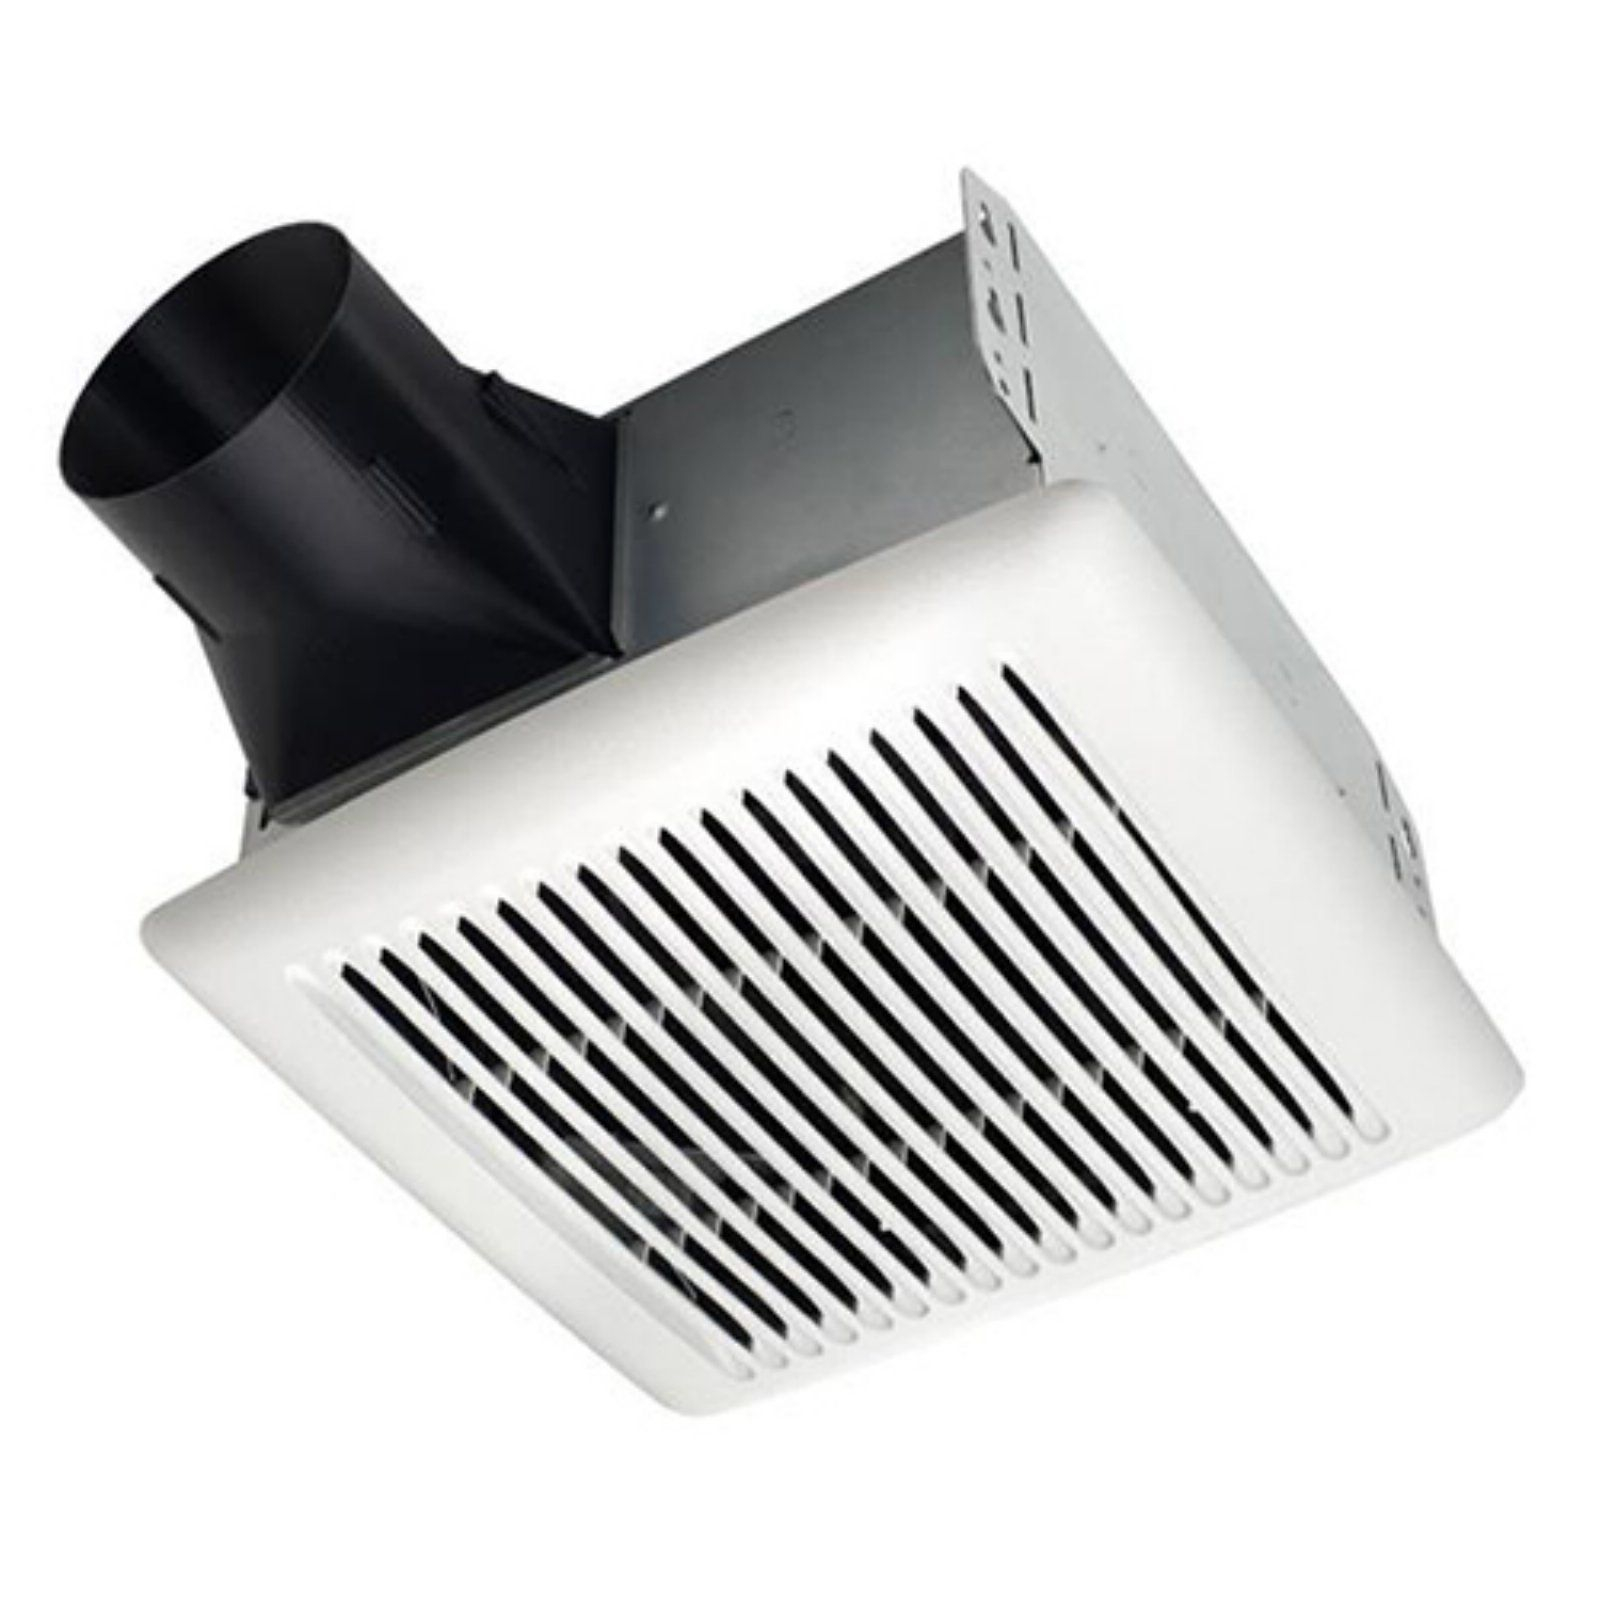 Broan Nutone Ae80b Invent Series Single Speed Fan Bathroom intended for size 1600 X 1600